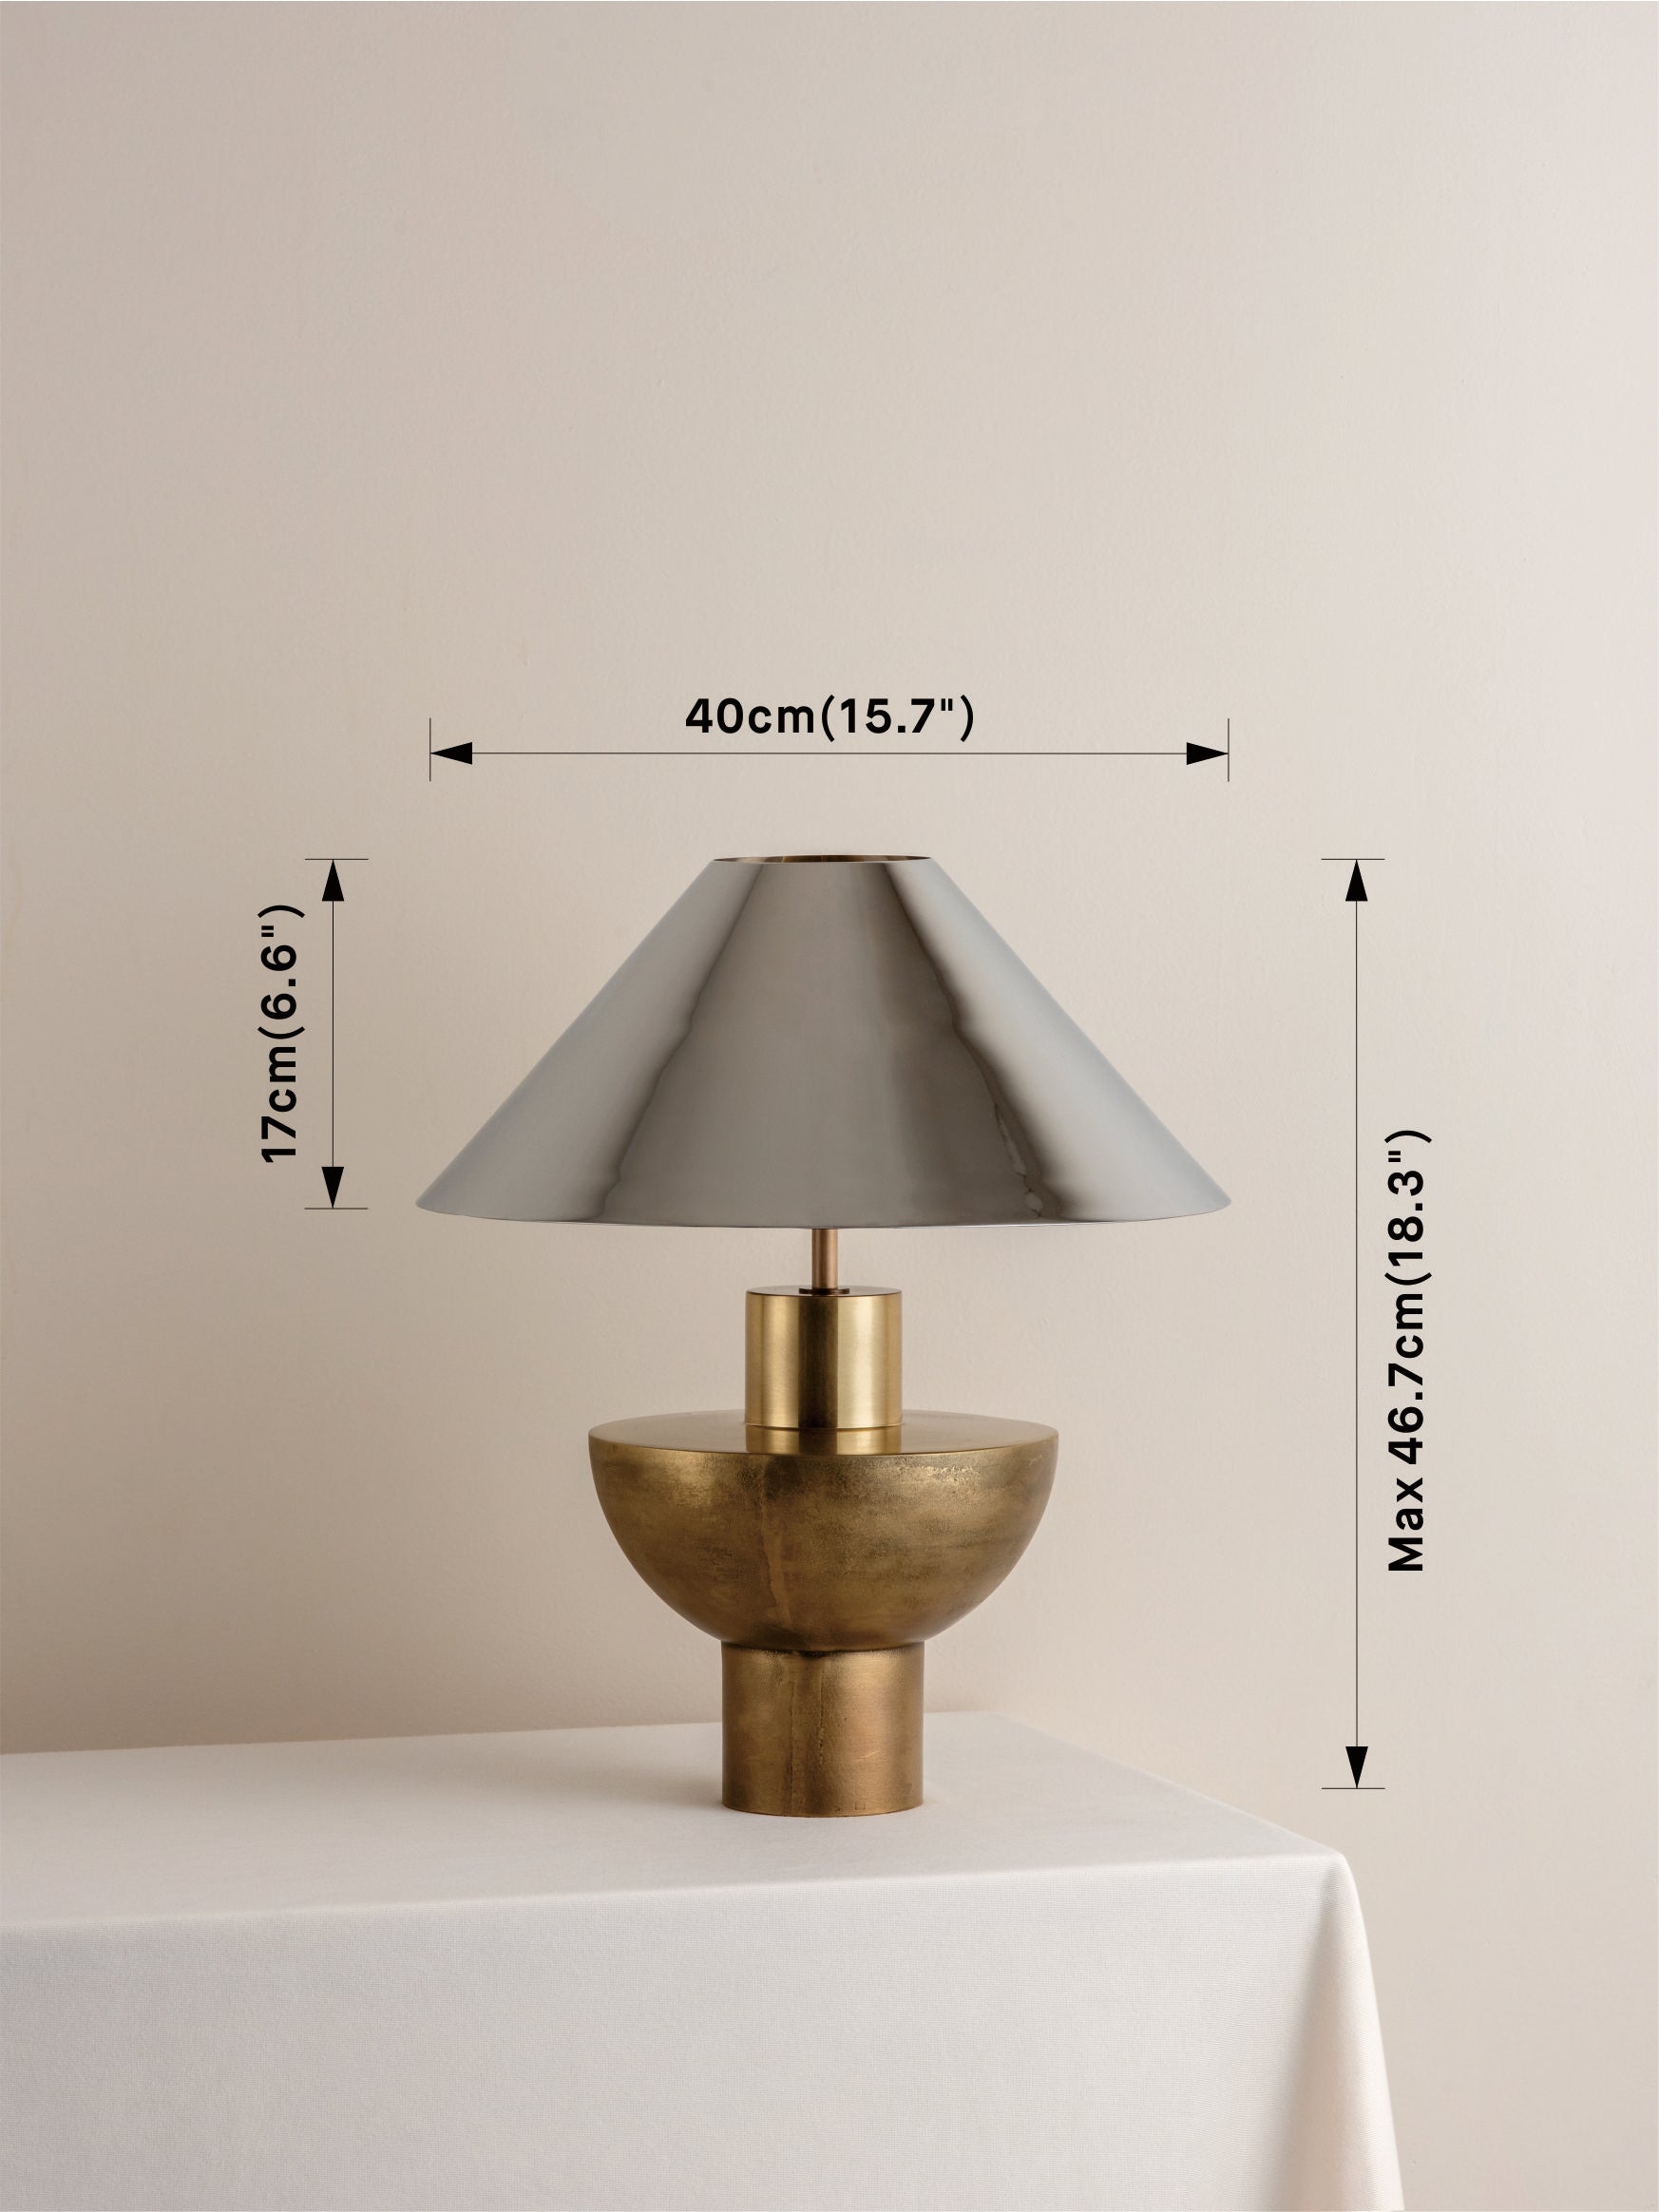 Editions brass lamp with + chrome shade | Table Lamp | Lights & Lamps | UK | Modern Affordable Designer Lighting